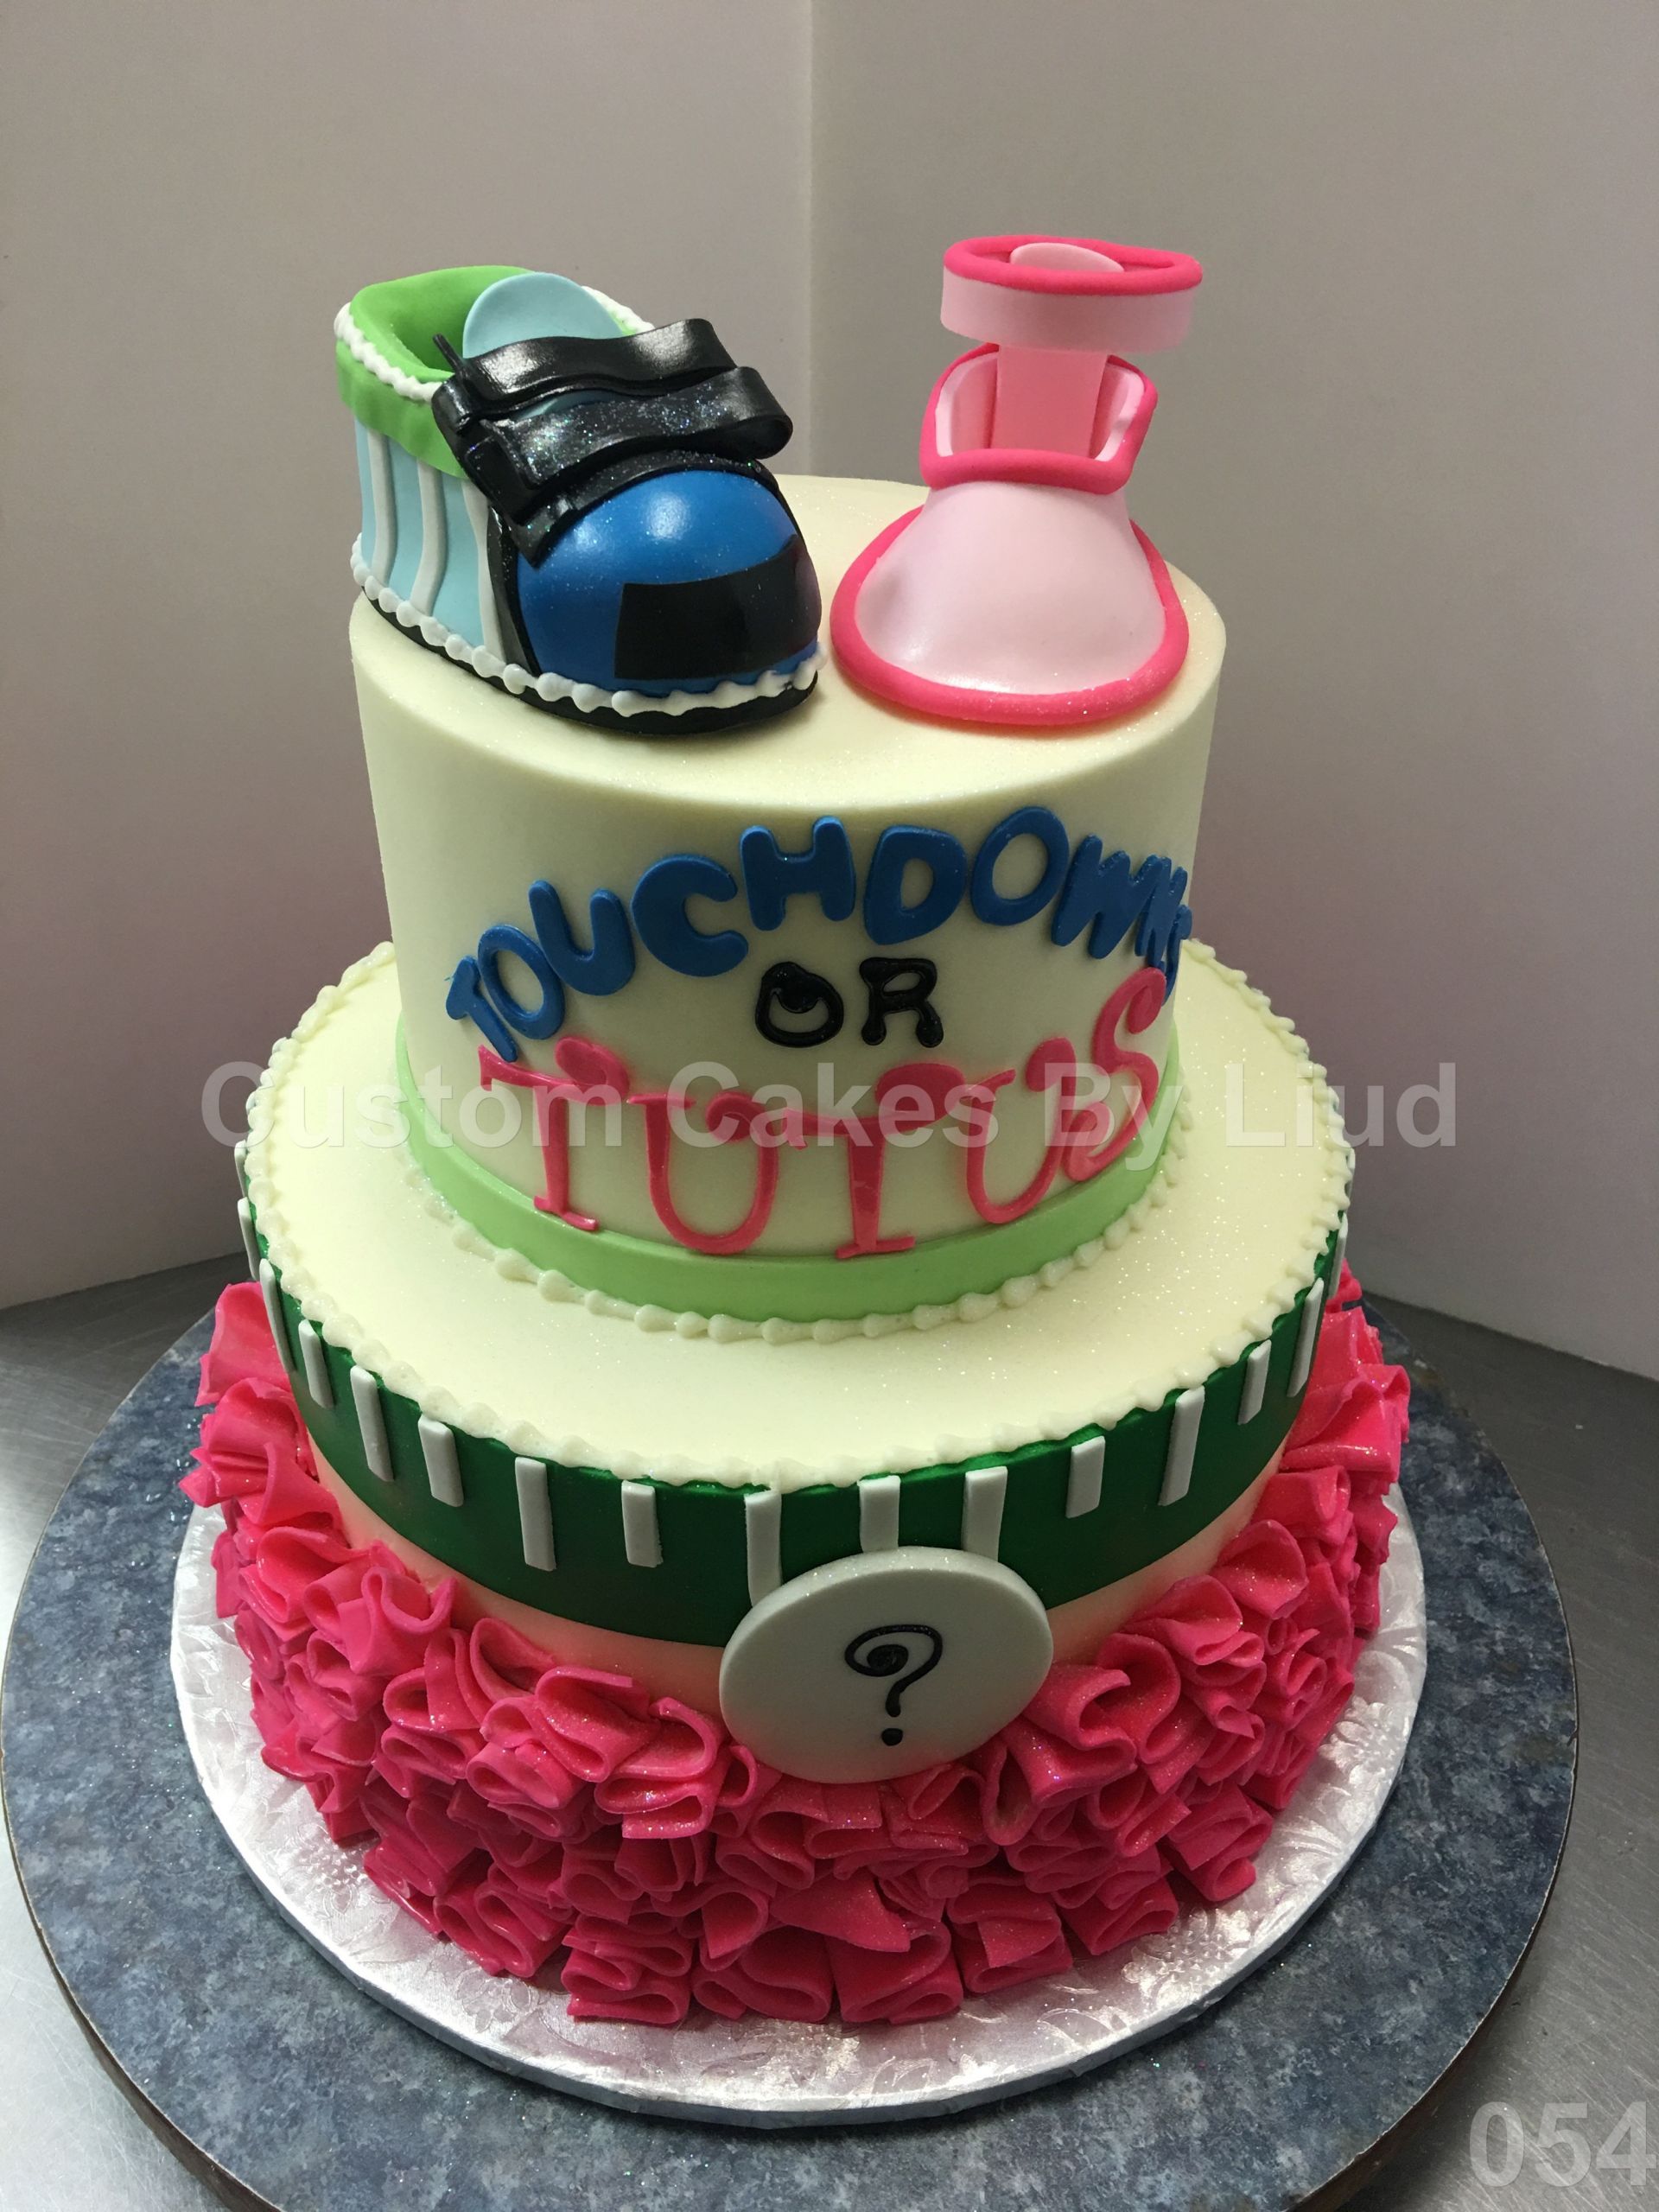 Birthday Cake Bakery Near Me
 Custom Cakes by Liud Coupons near me in Roswell